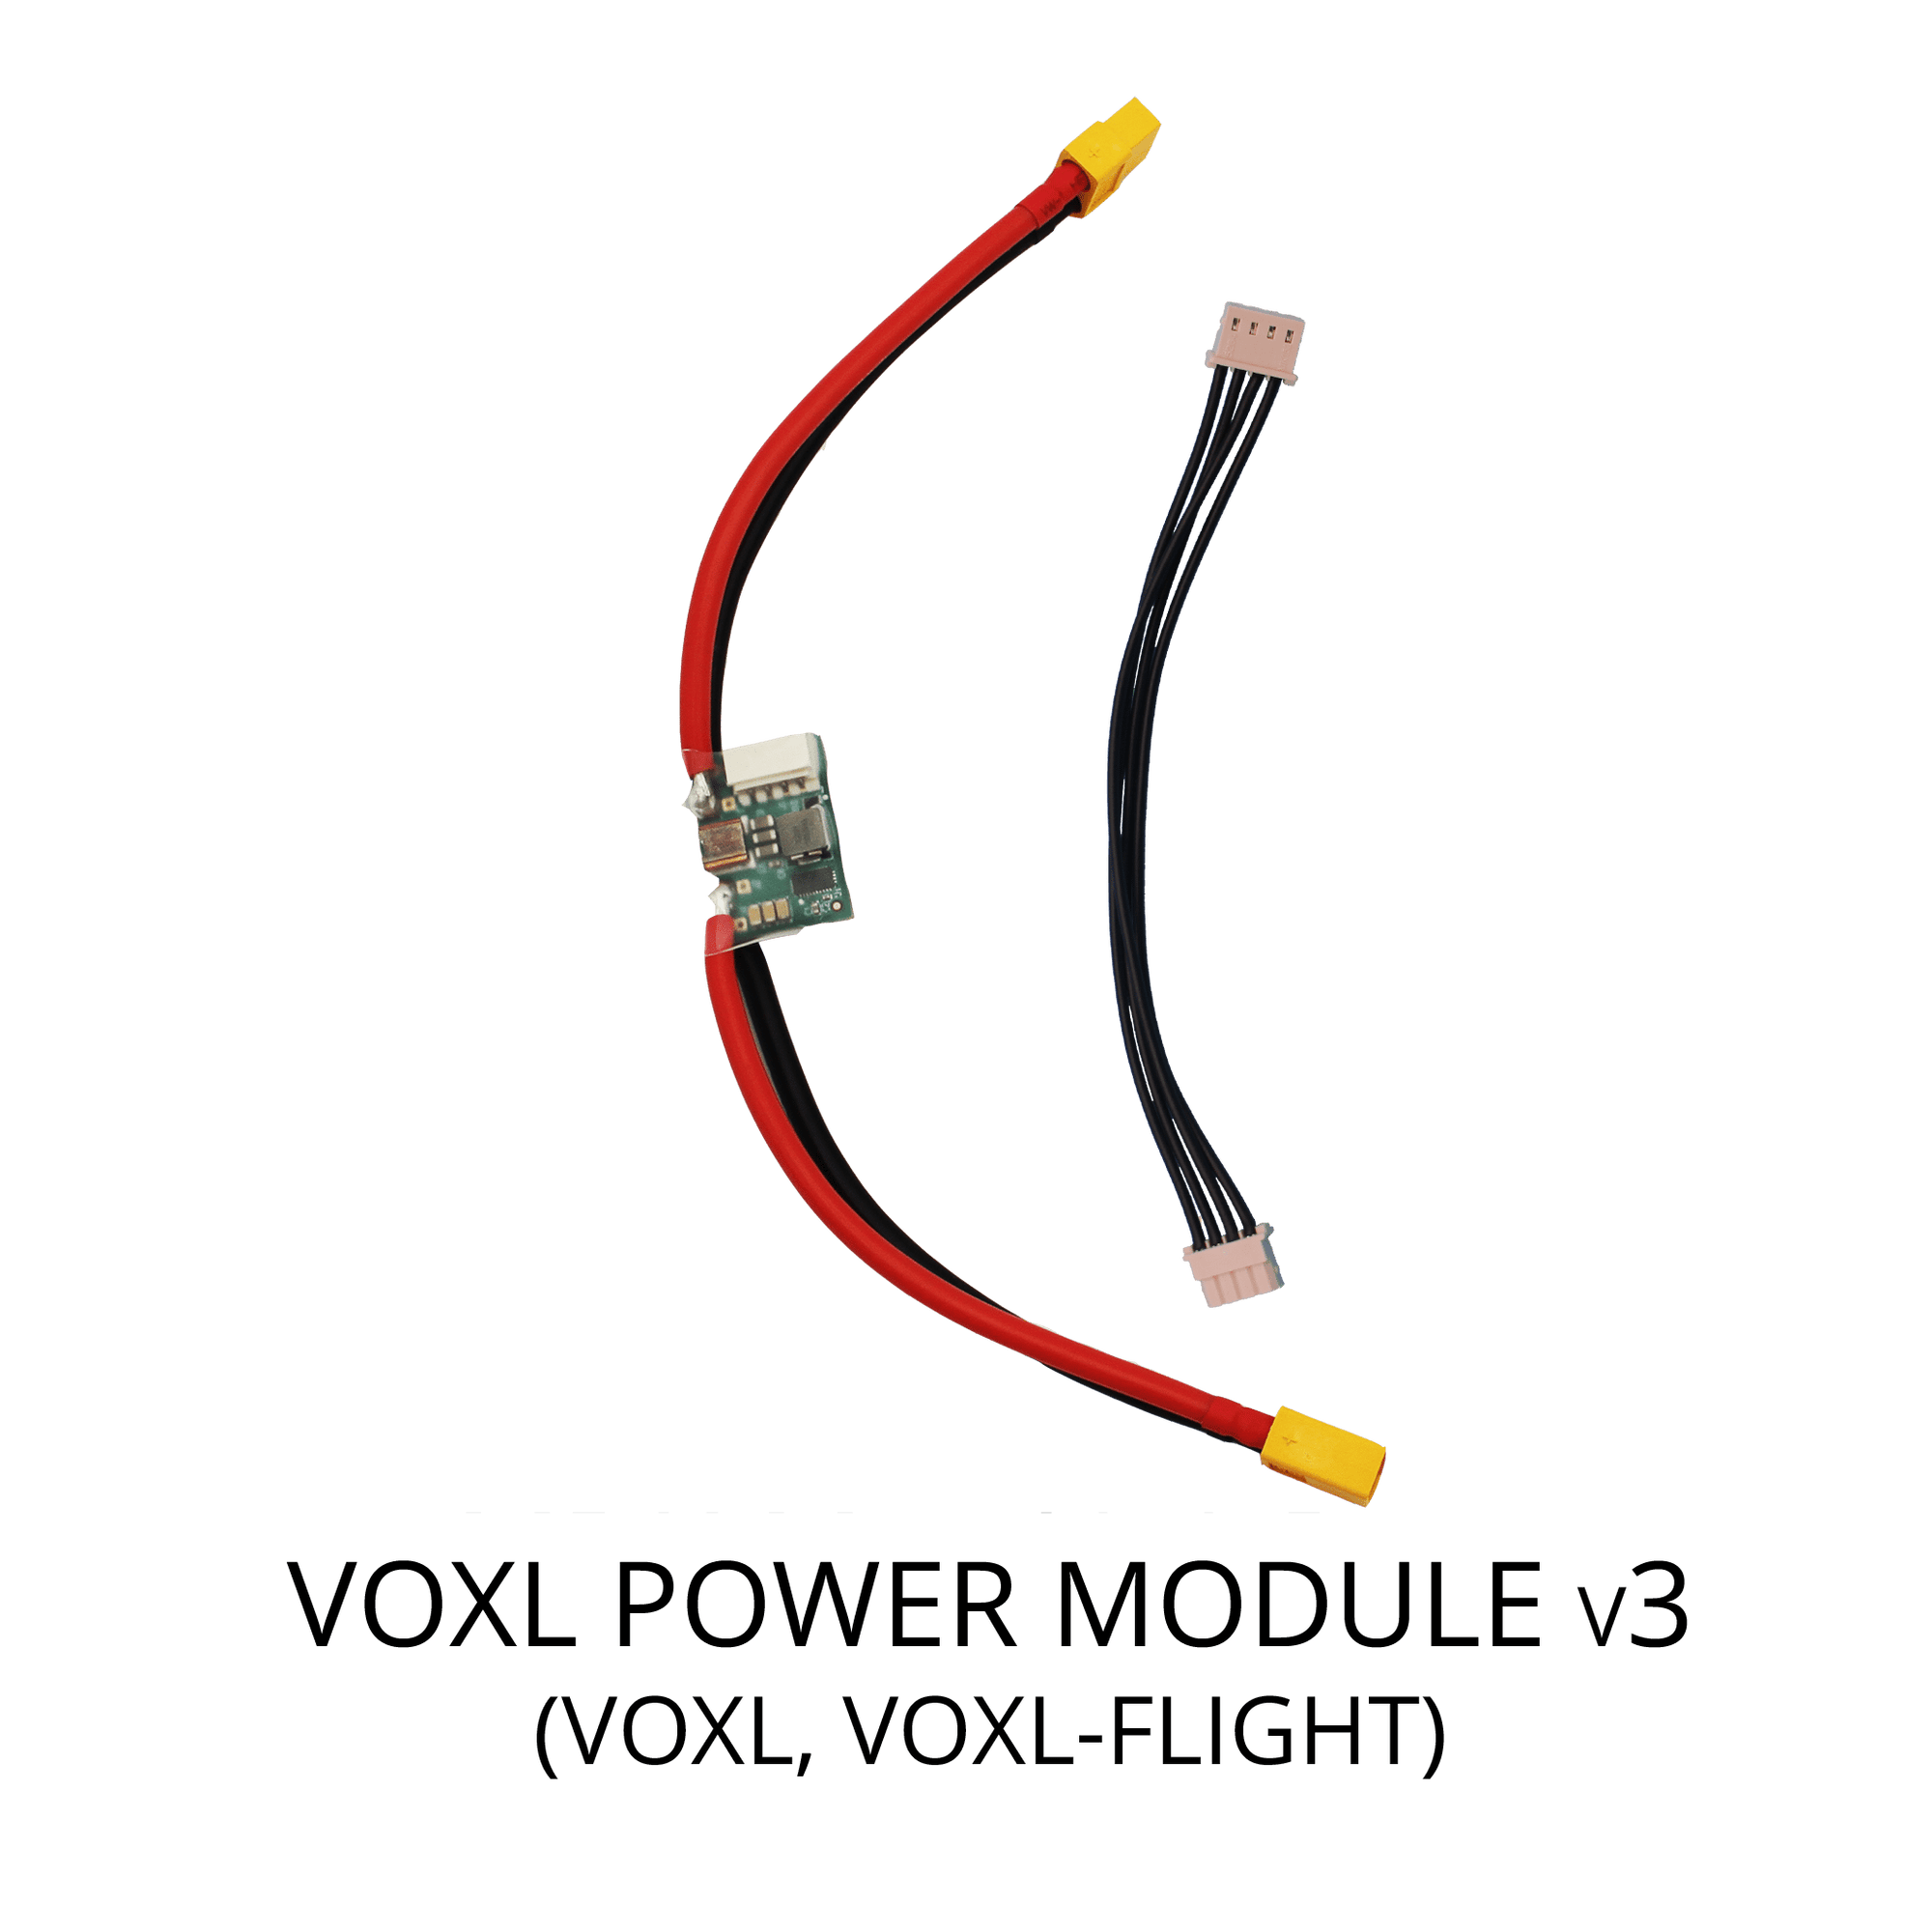 ModalAI, Inc. Accessory For VOXL and VOXL-Flight (4pin to 4pin cable) Power Module v3 for Companion Computer, Flight Controller and ESCs (Drones and Robots)